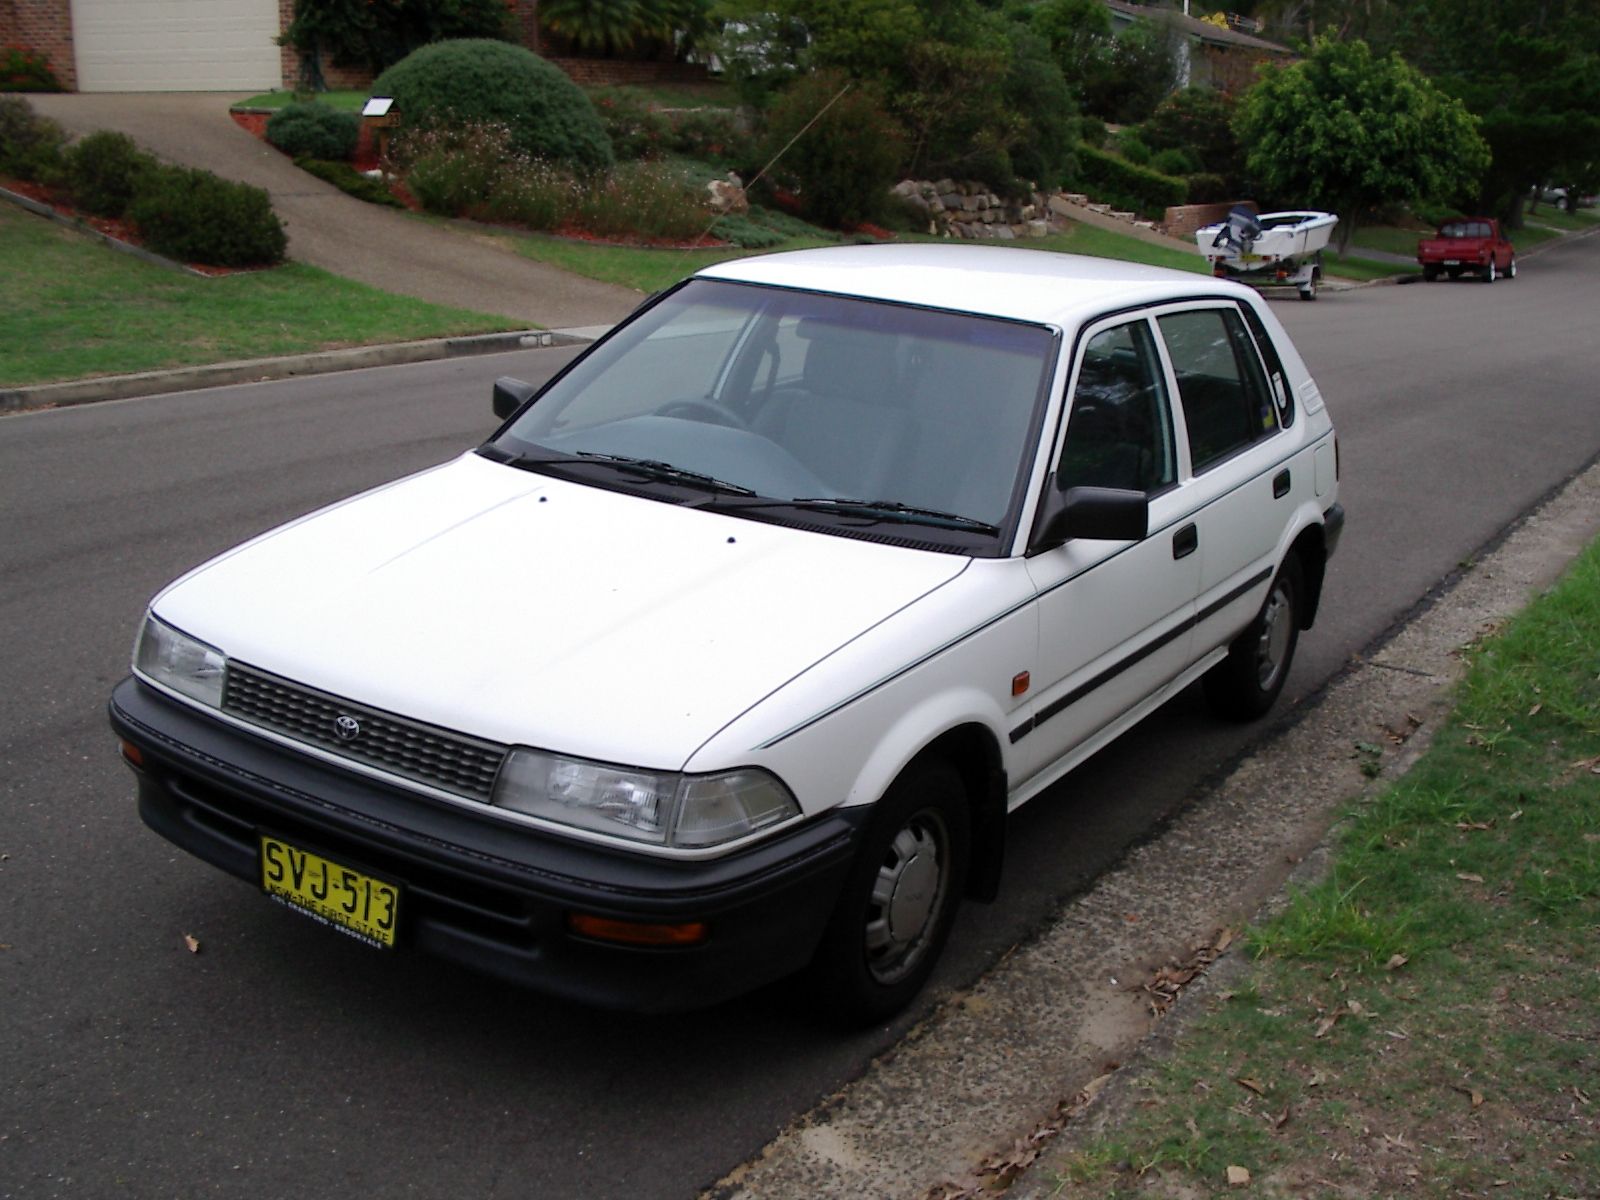 A photo of a white 1993 Toyota Corolla hatchback taken from the front three-quarters.